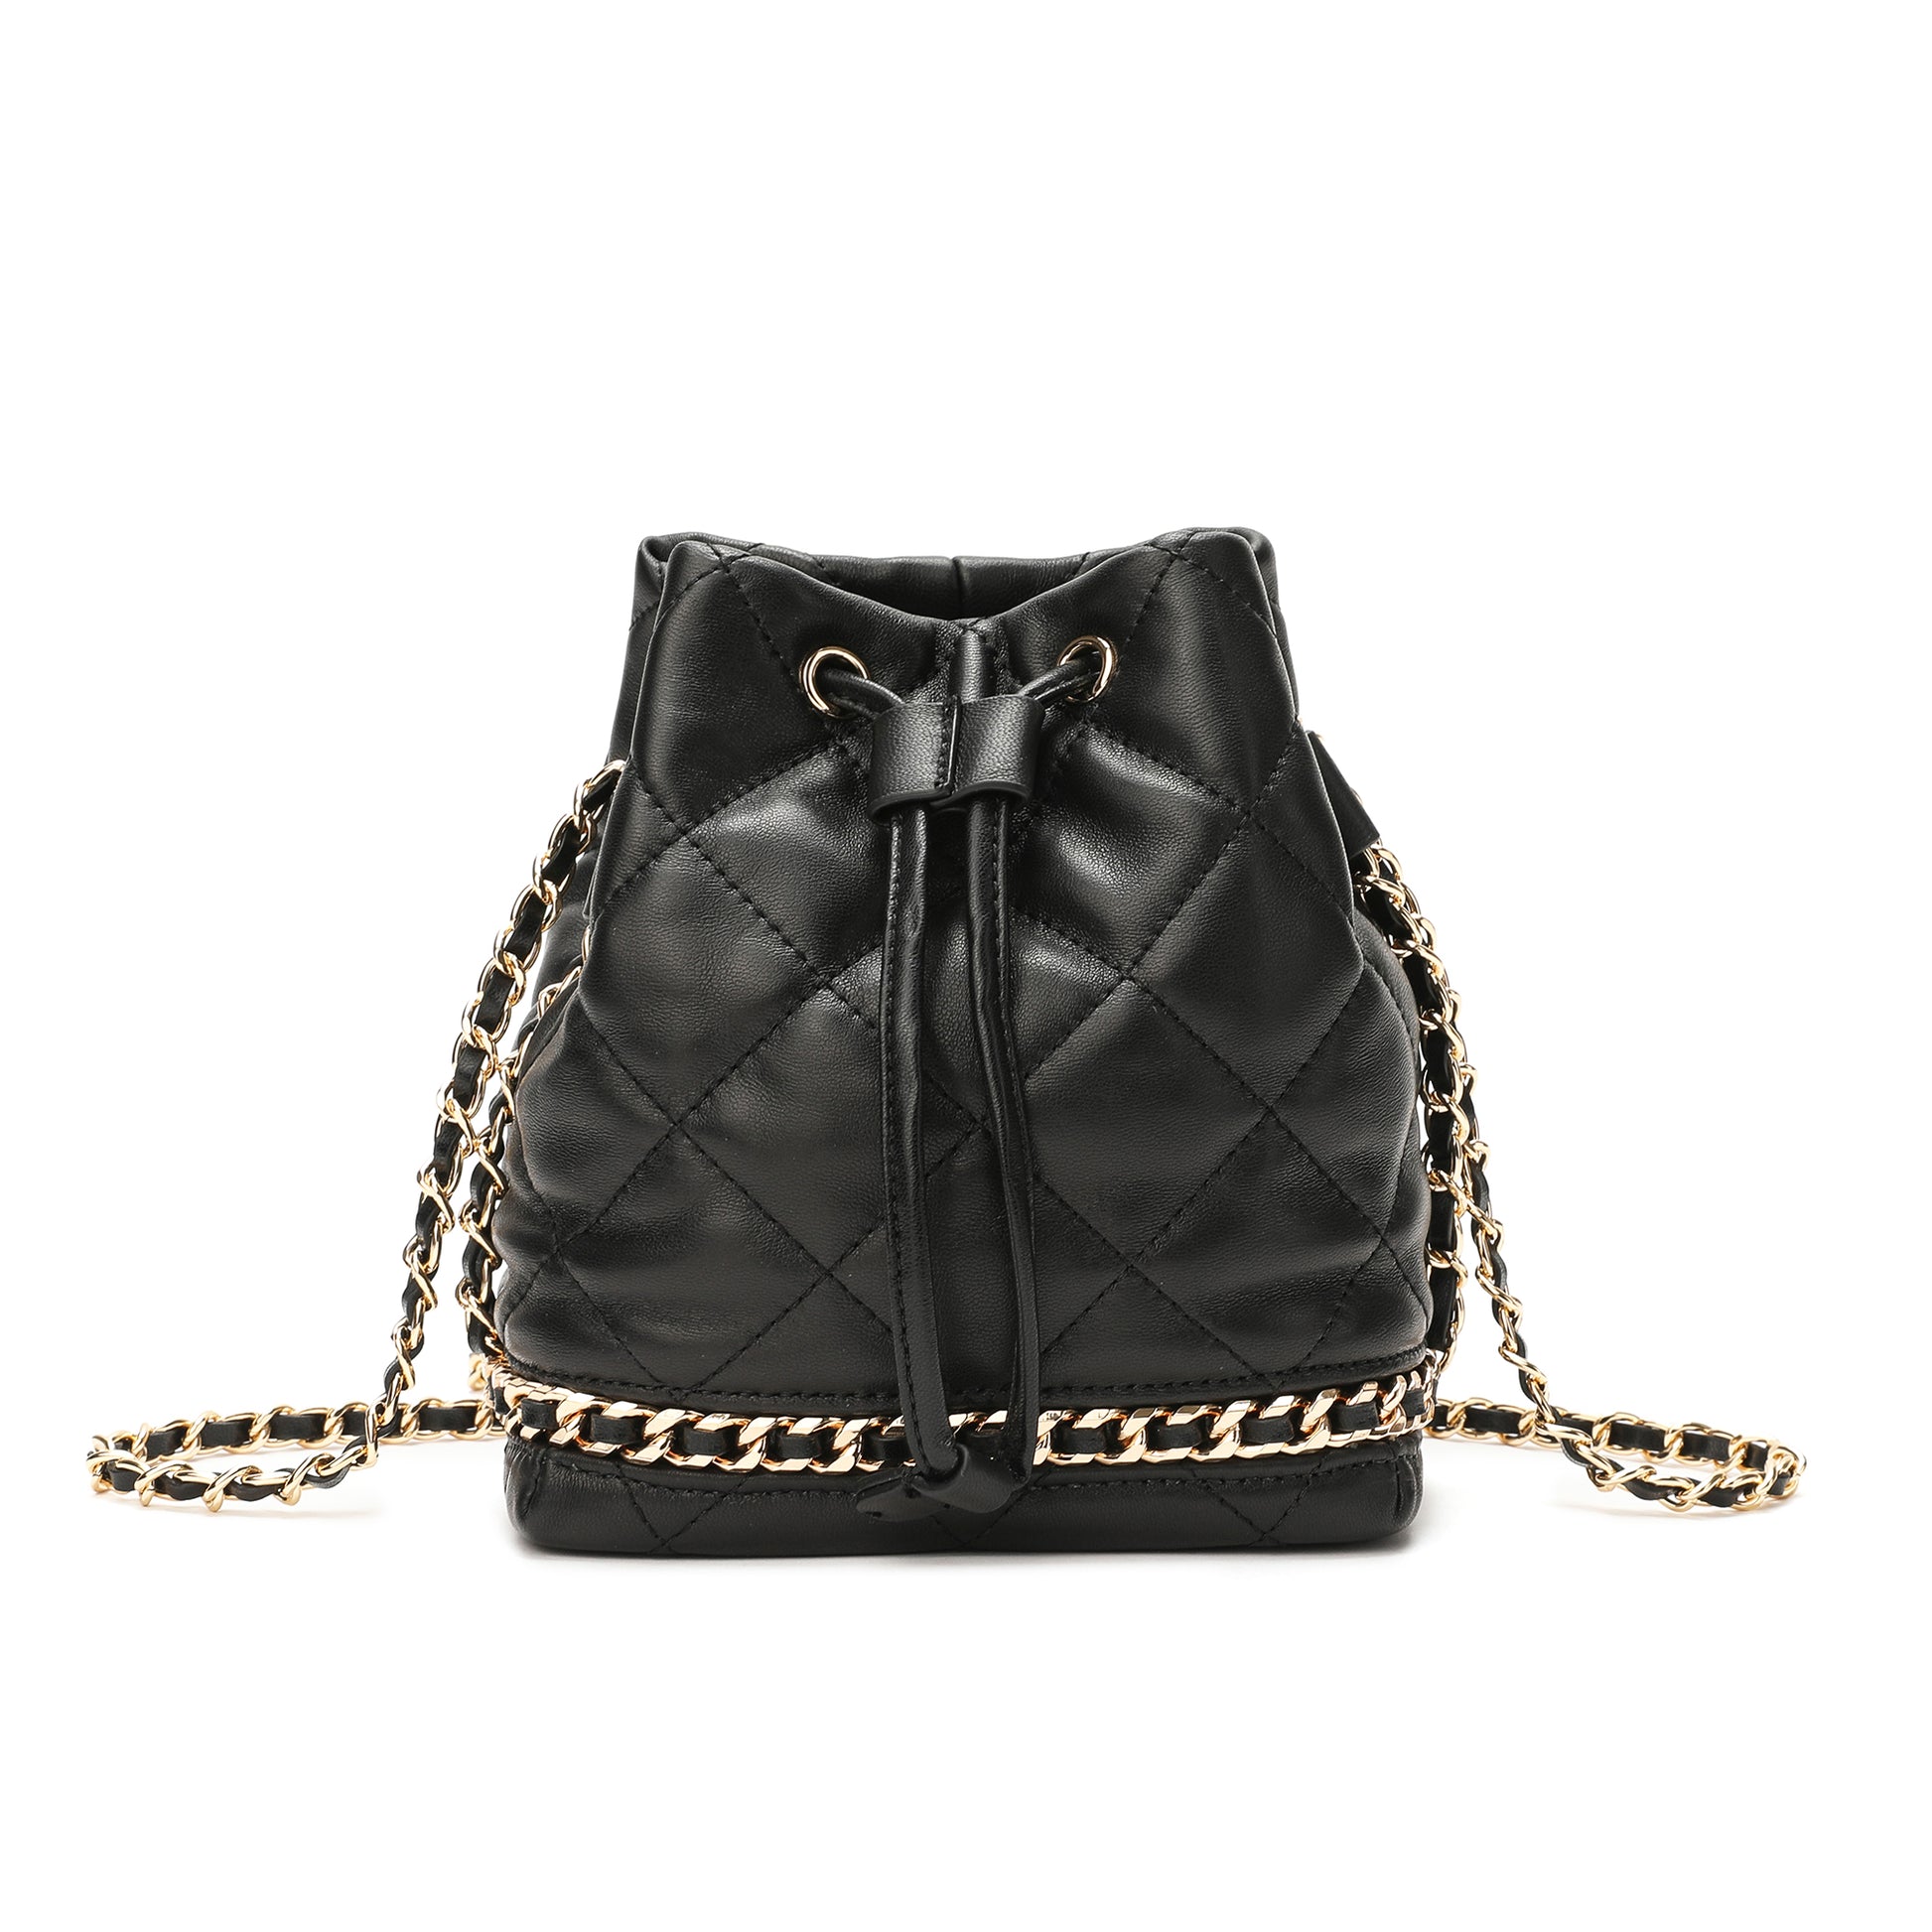 Chanel Quilted Bucket Bag – The Hosta